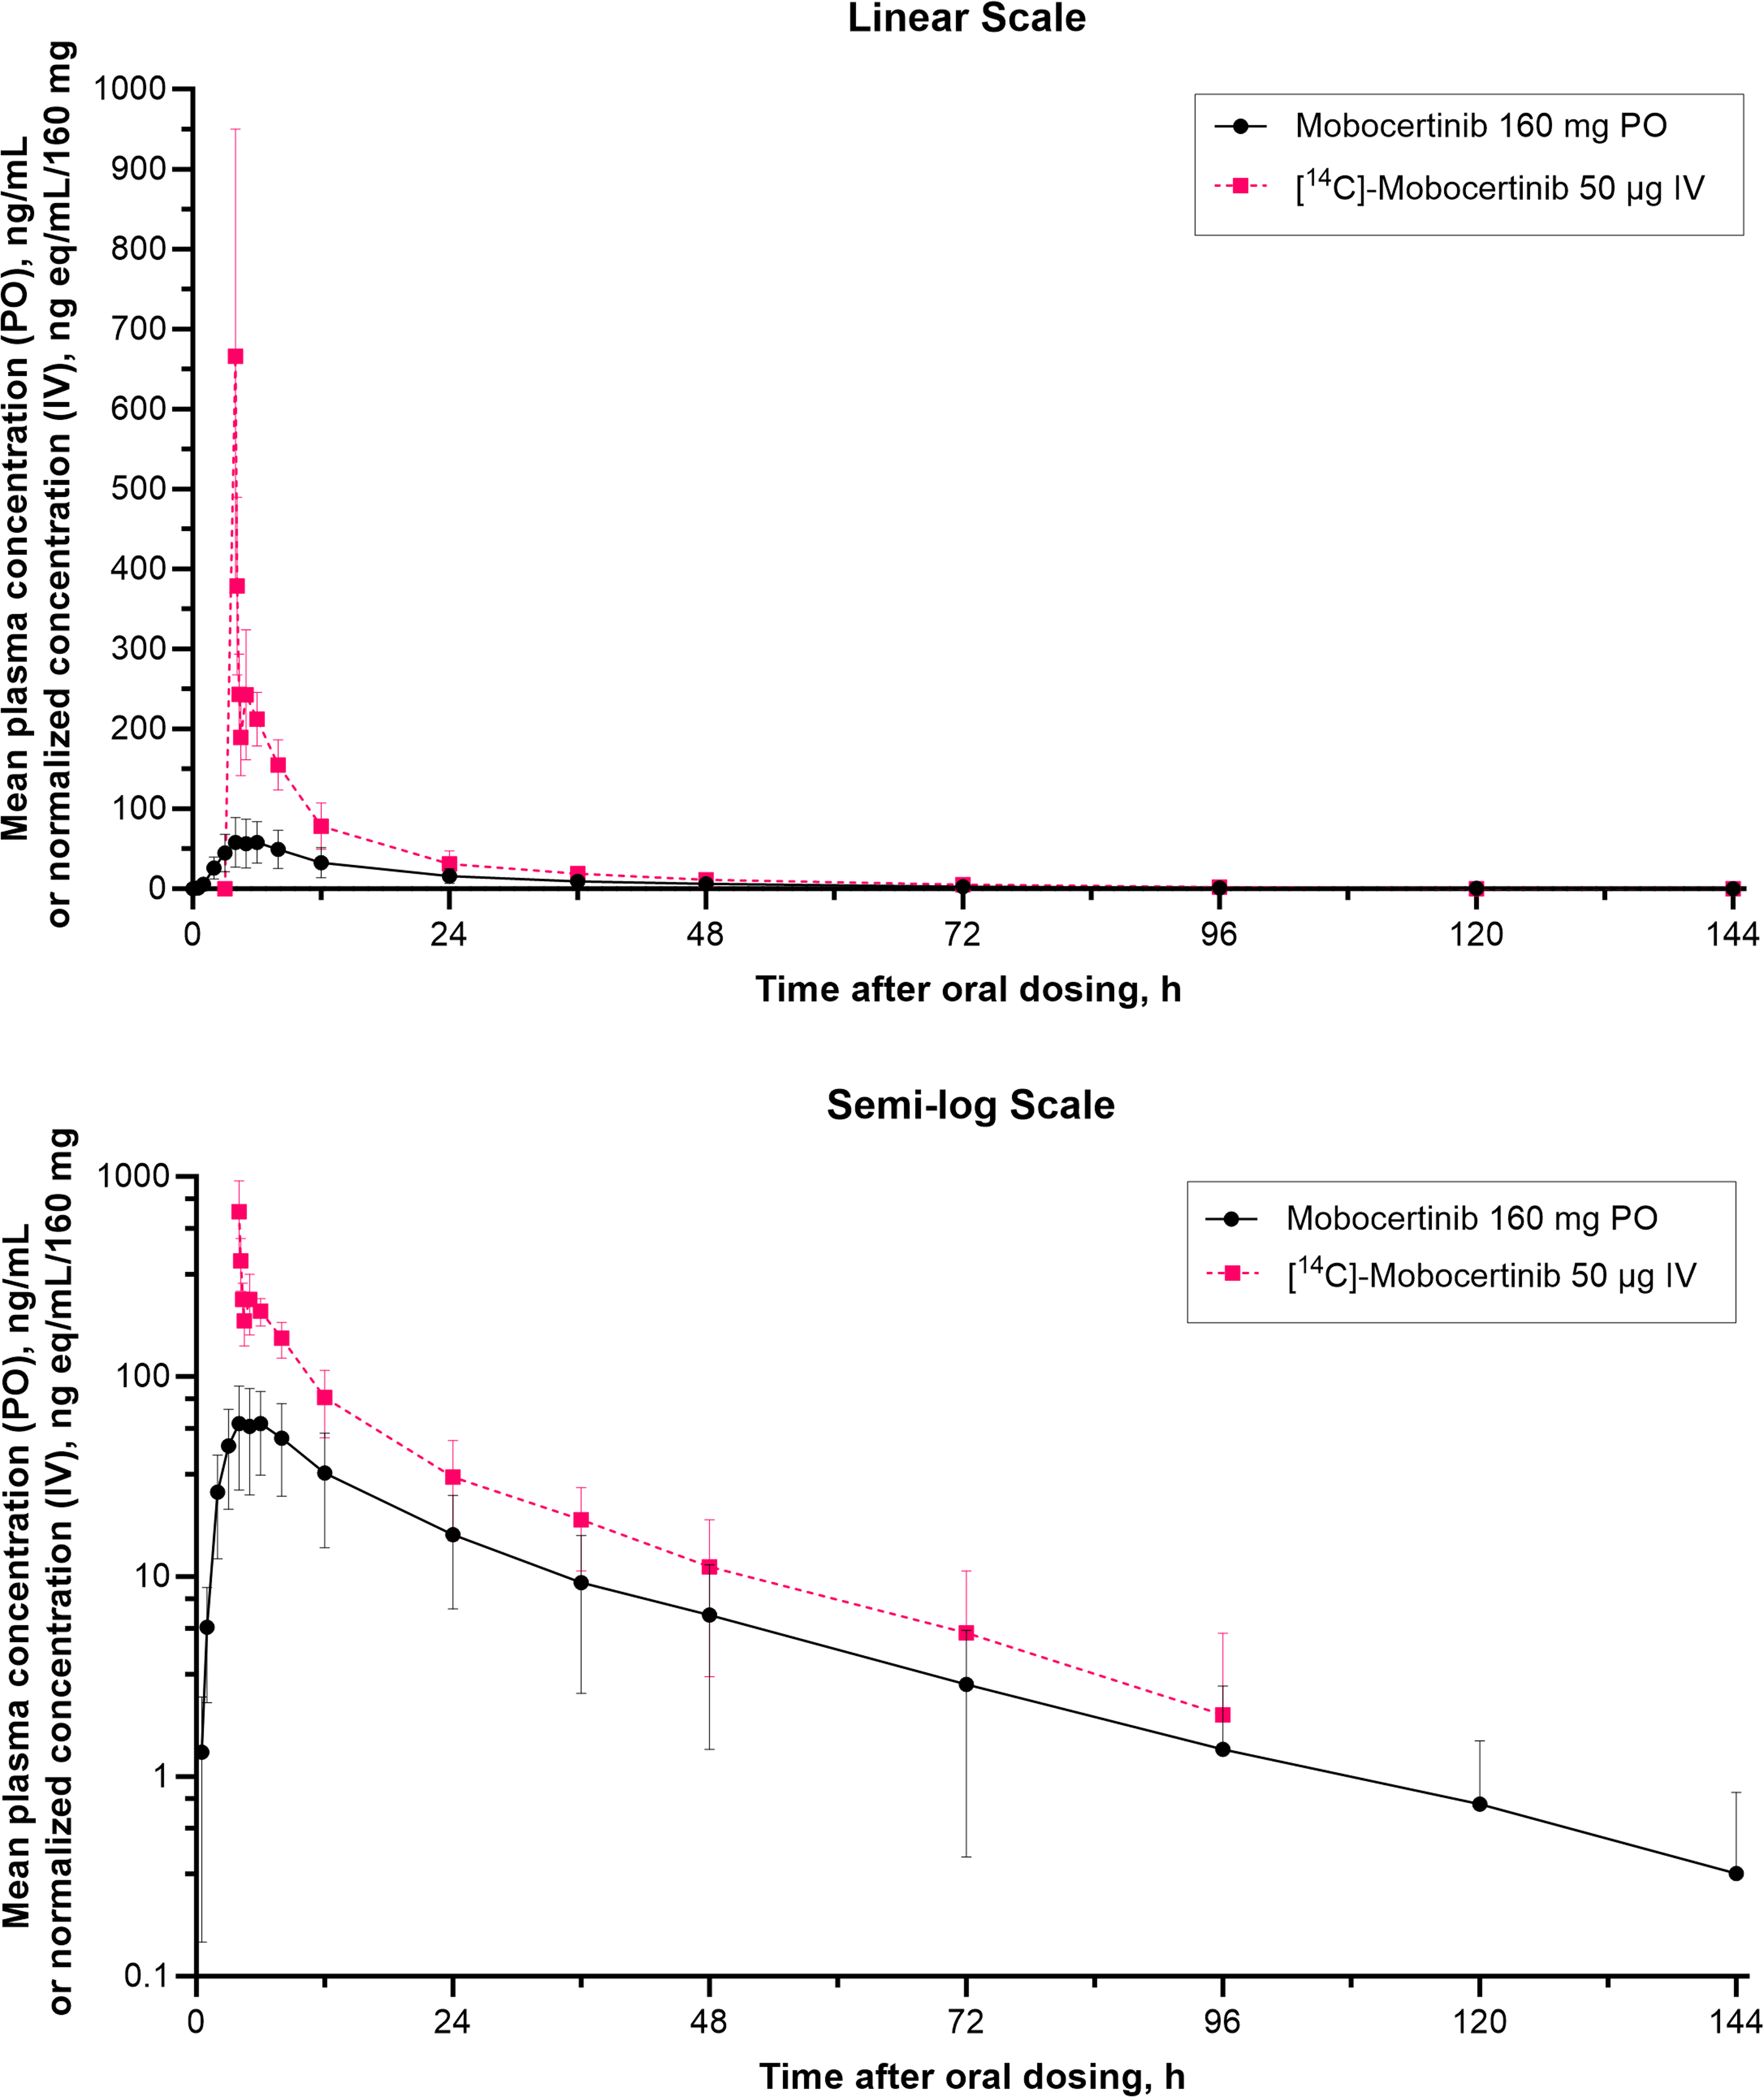 A phase 1 study to assess the absolute bioavailability, mass balance, pharmacokinetics, metabolism, and excretion of [14C]-mobocertinib, an oral inhibitor of EGFR exon 20 insertion mutations, in healthy participants